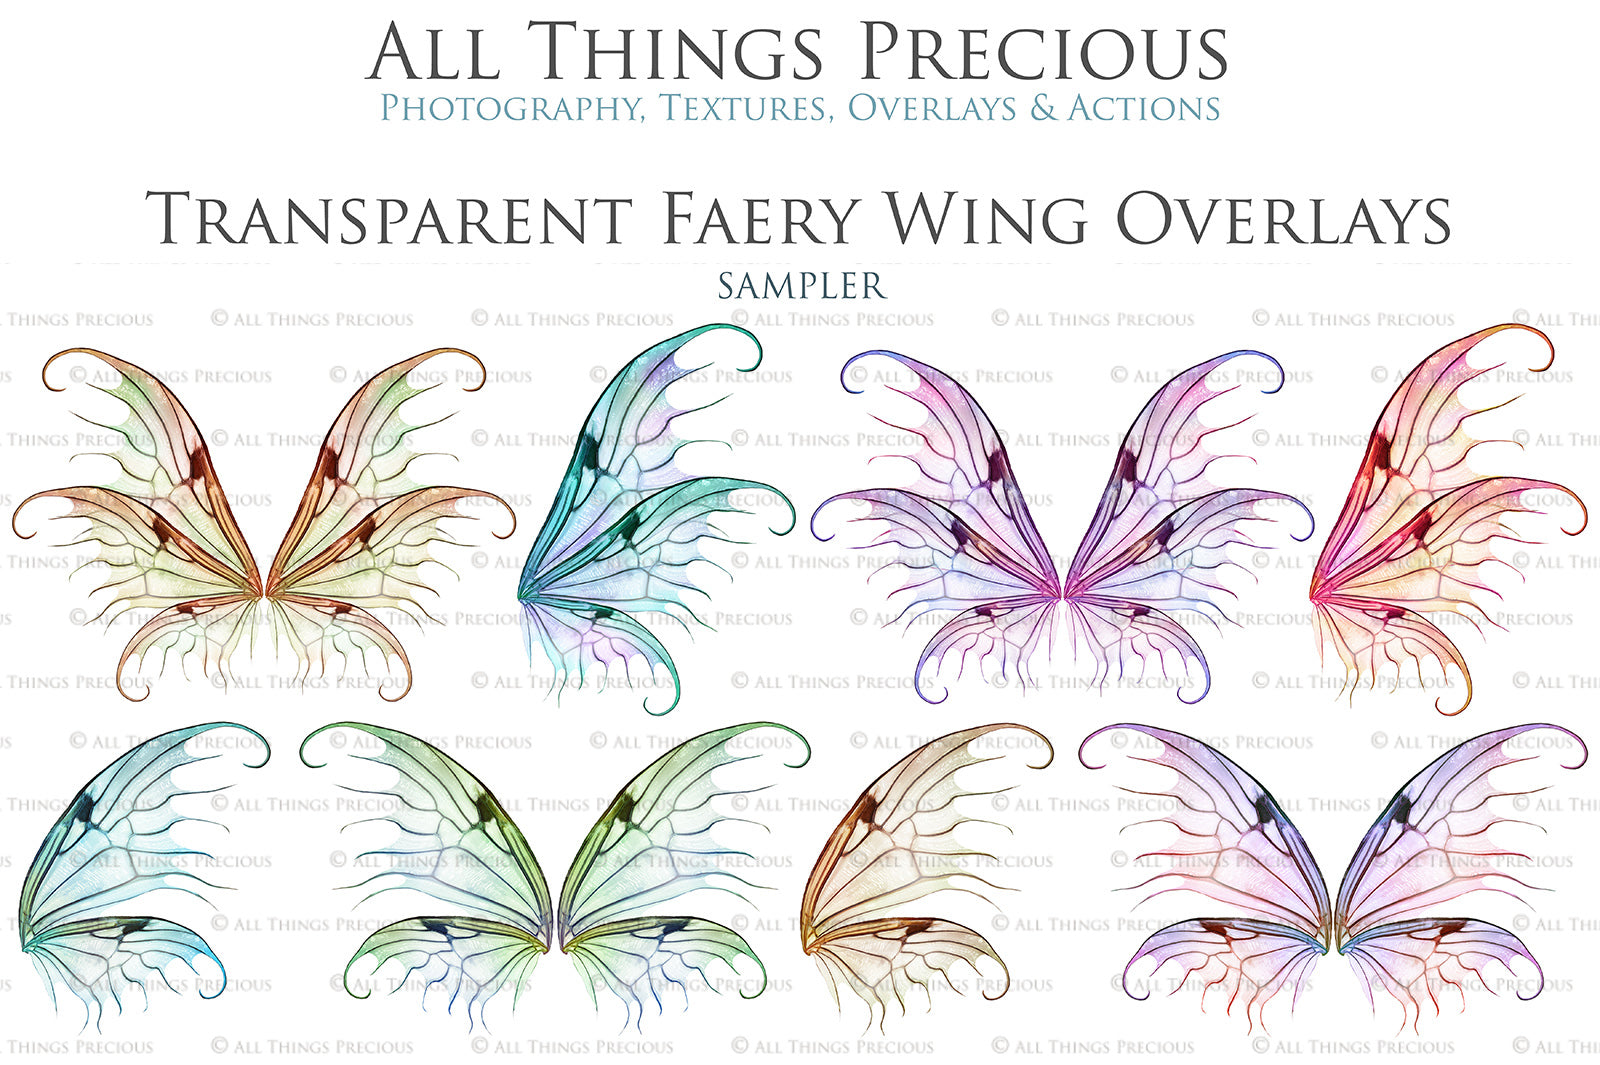 Digital Fairy Wing Overlays clipart. Png transparent see through files for photoshop. Butterfly Angel, Color, Print Photography editing. High resolution, 300dpi. Printable, Photography Graphic design assets, add on stock resources. Magical Scrapbooking design. Faery Photographer edit. Colorful Big Bundle. ATP Textures.